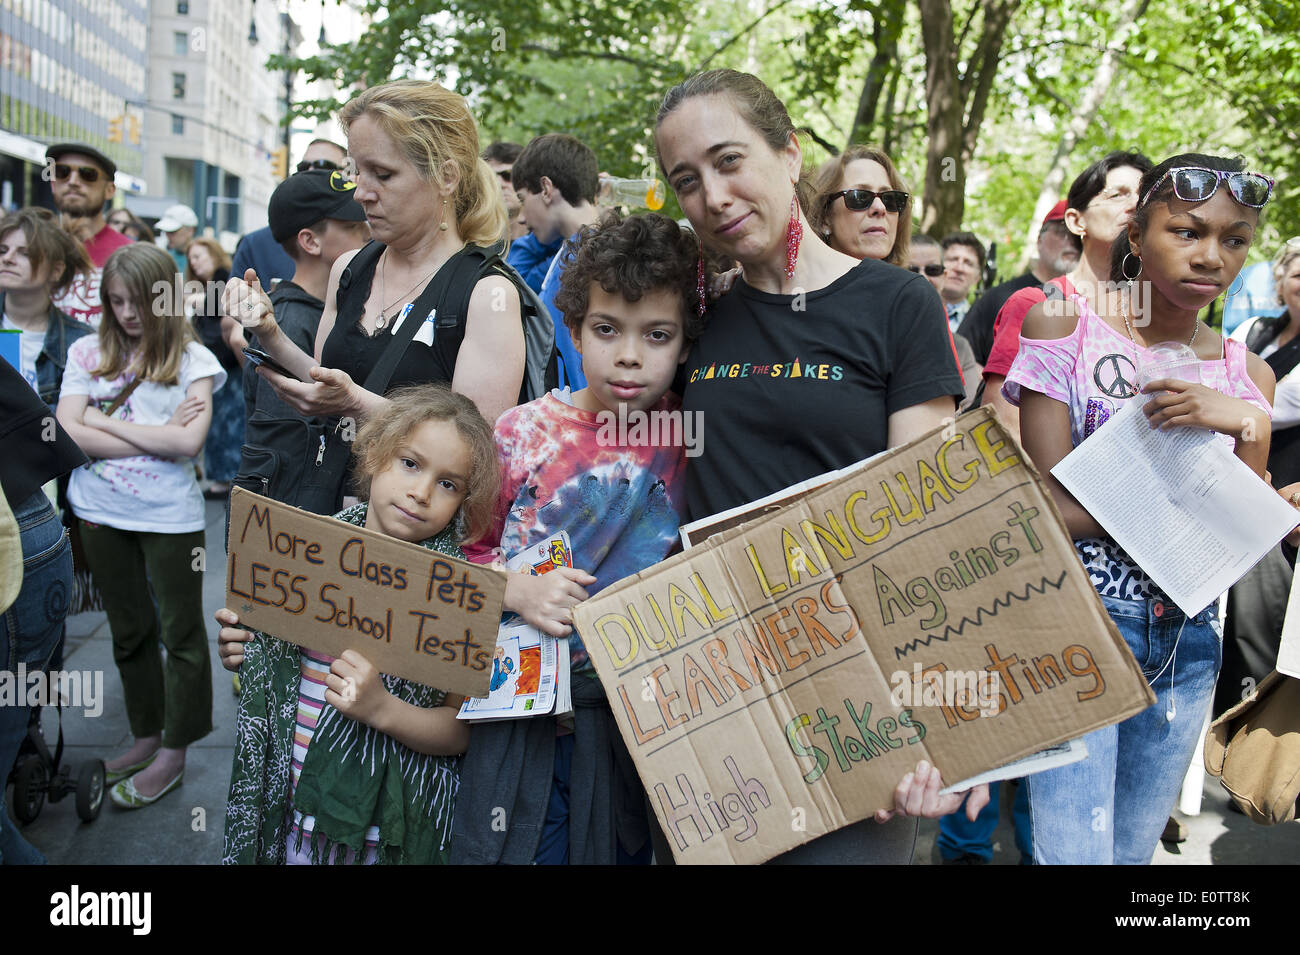 Demonstration by NYC Public School parents, teachers, and students against Charter Schools at City Hall Park in Manhattan, 2014. Stock Photo